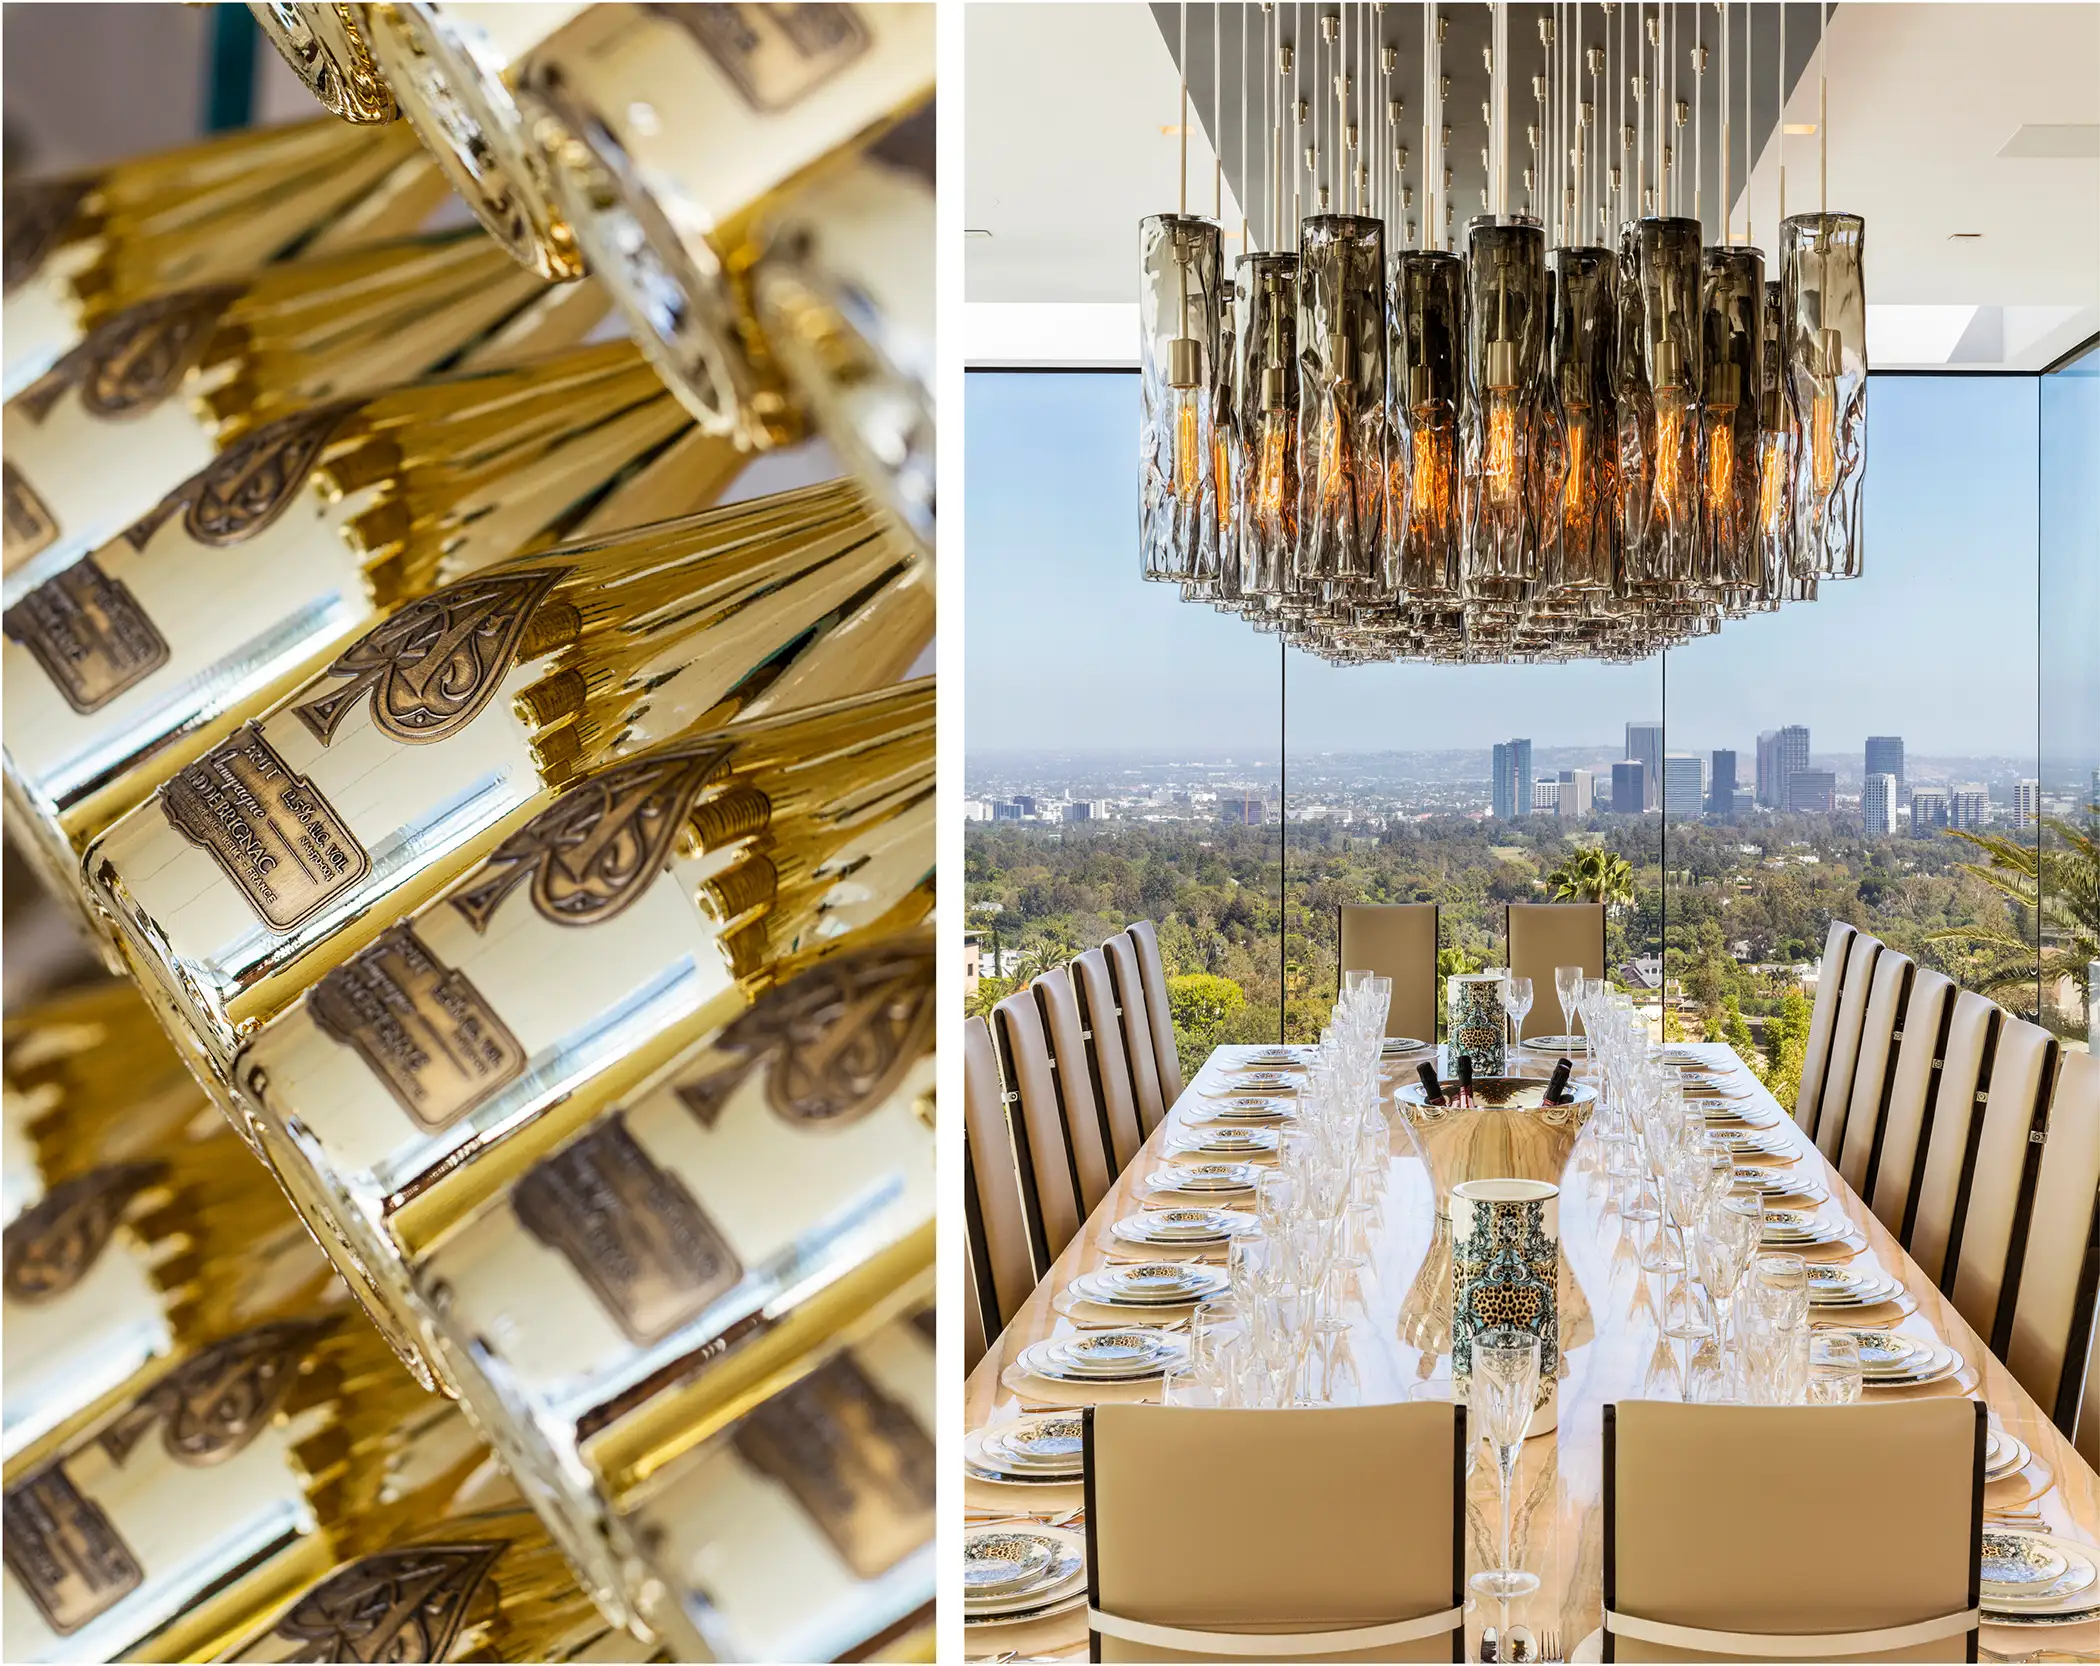 $250 Million Bel Air Home Champagne Collection and Formal Dining Room